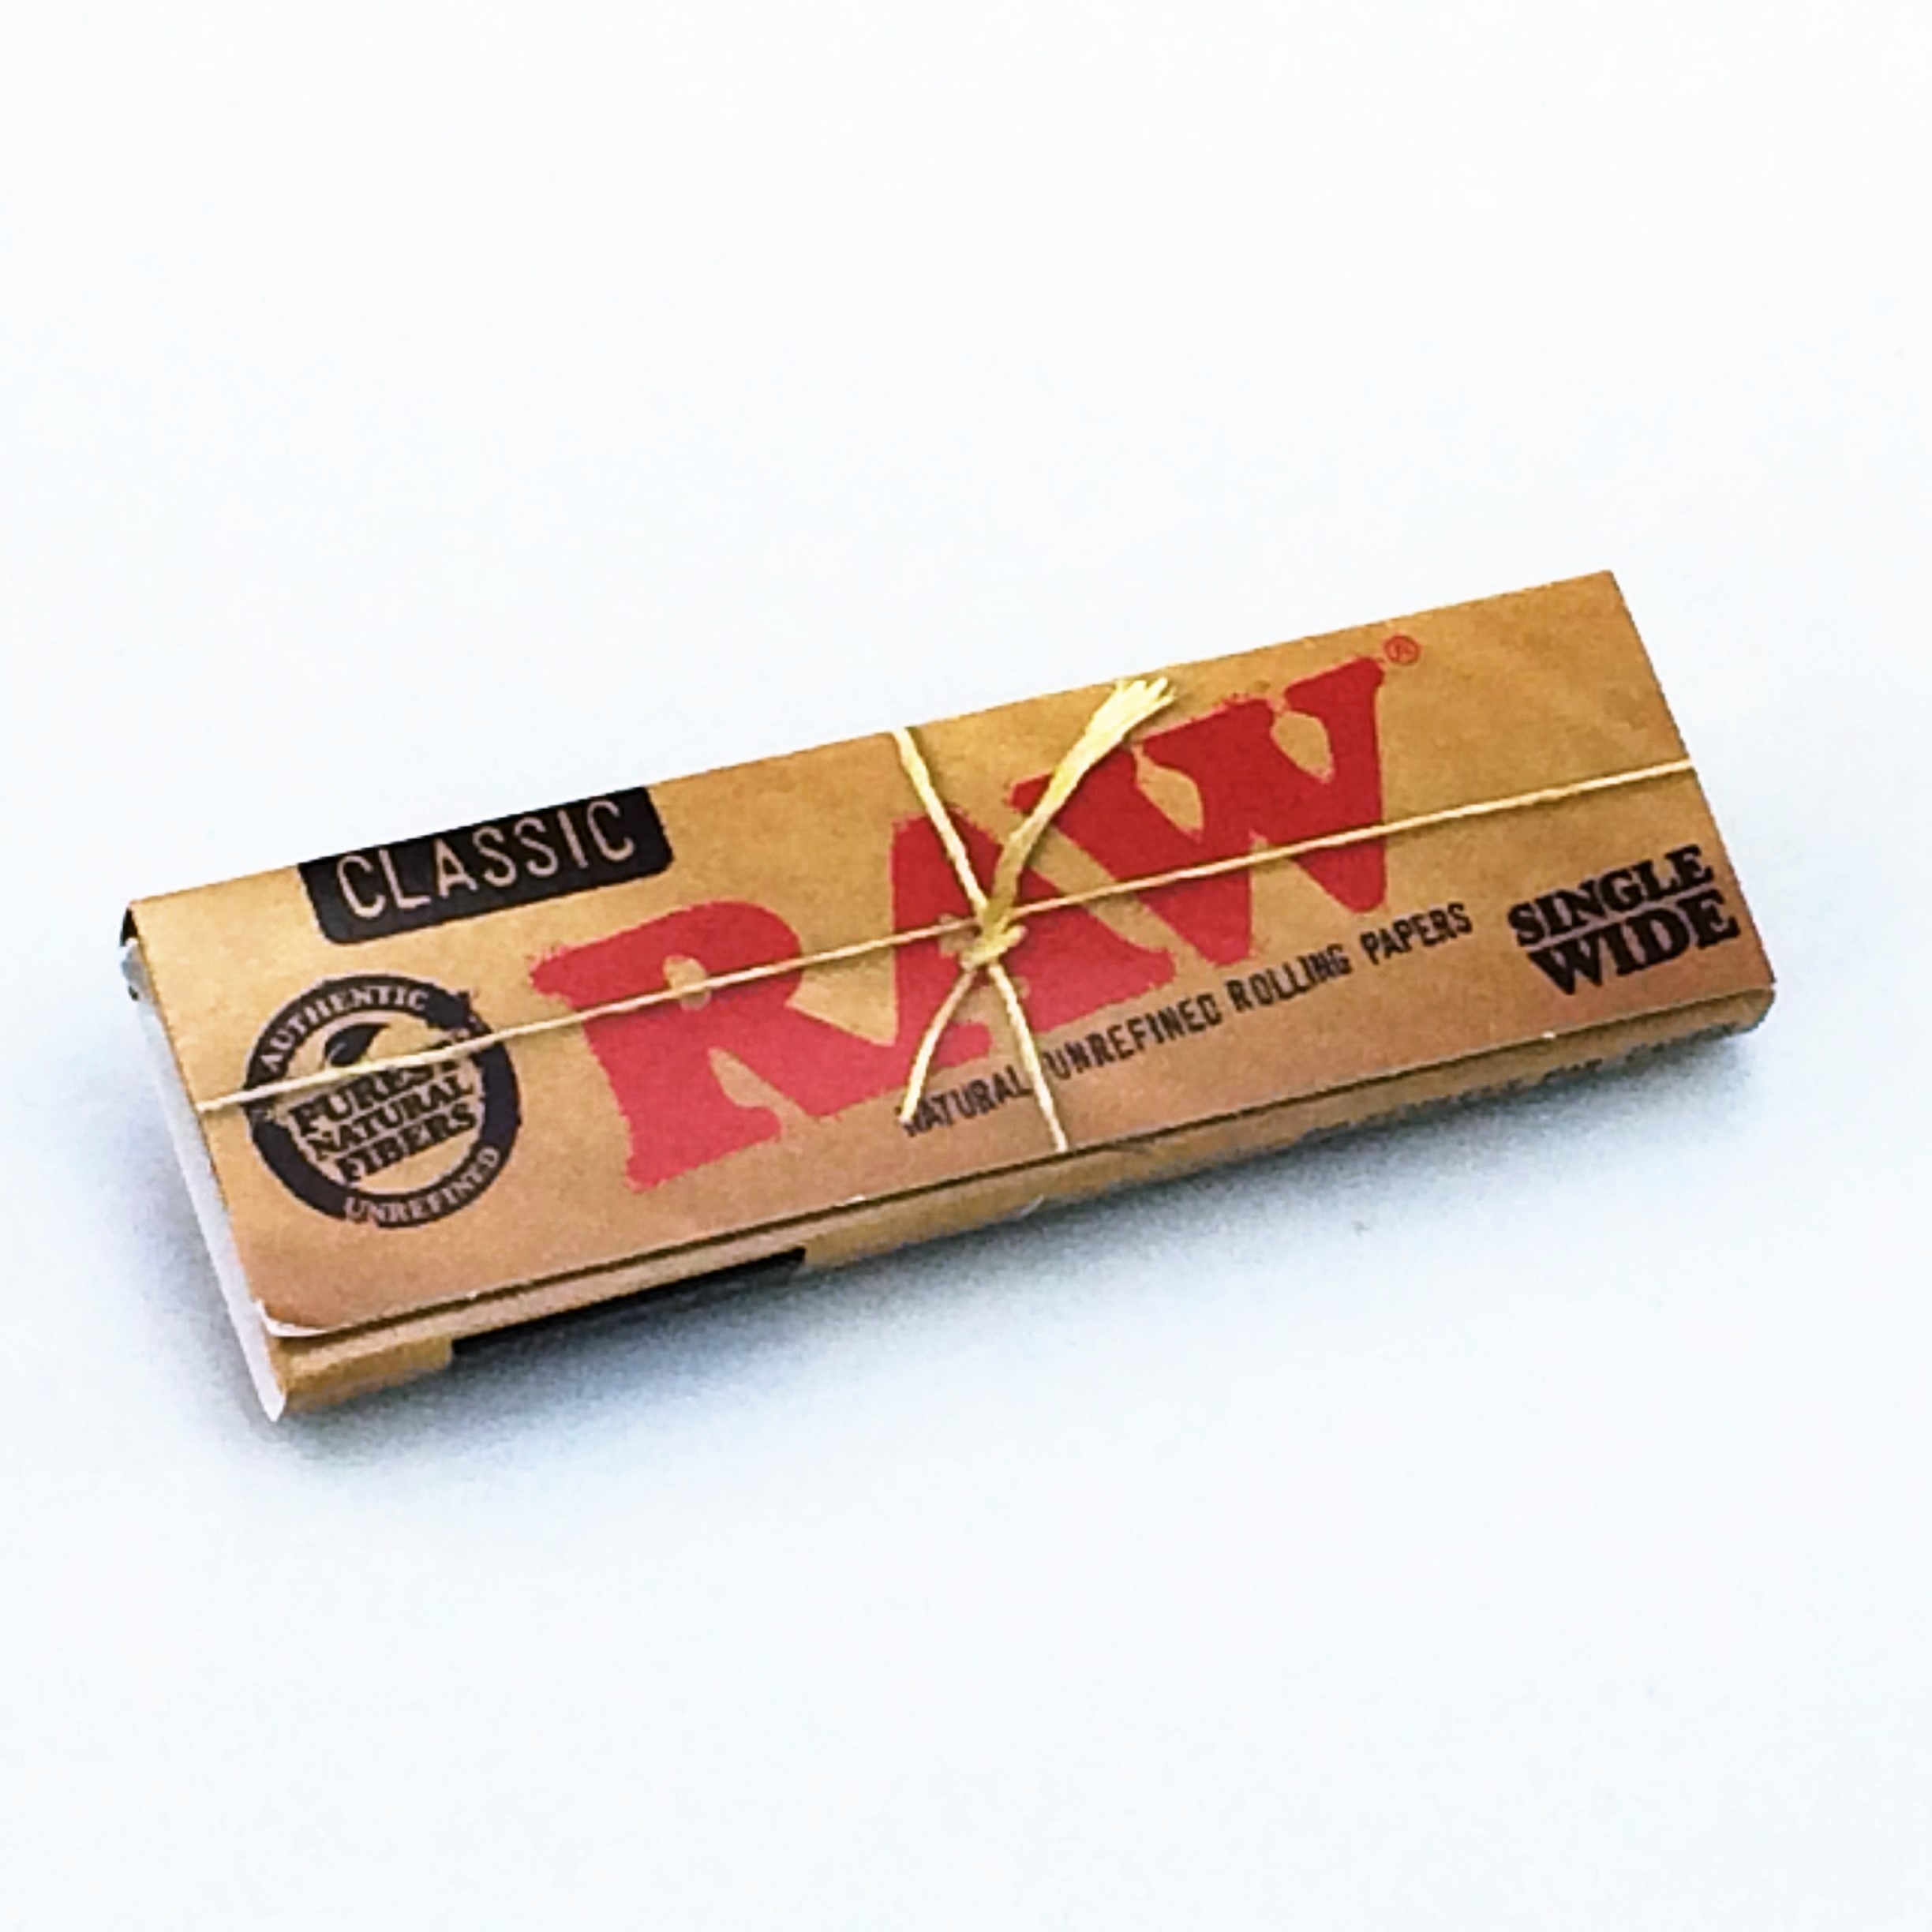 raw rolling papers